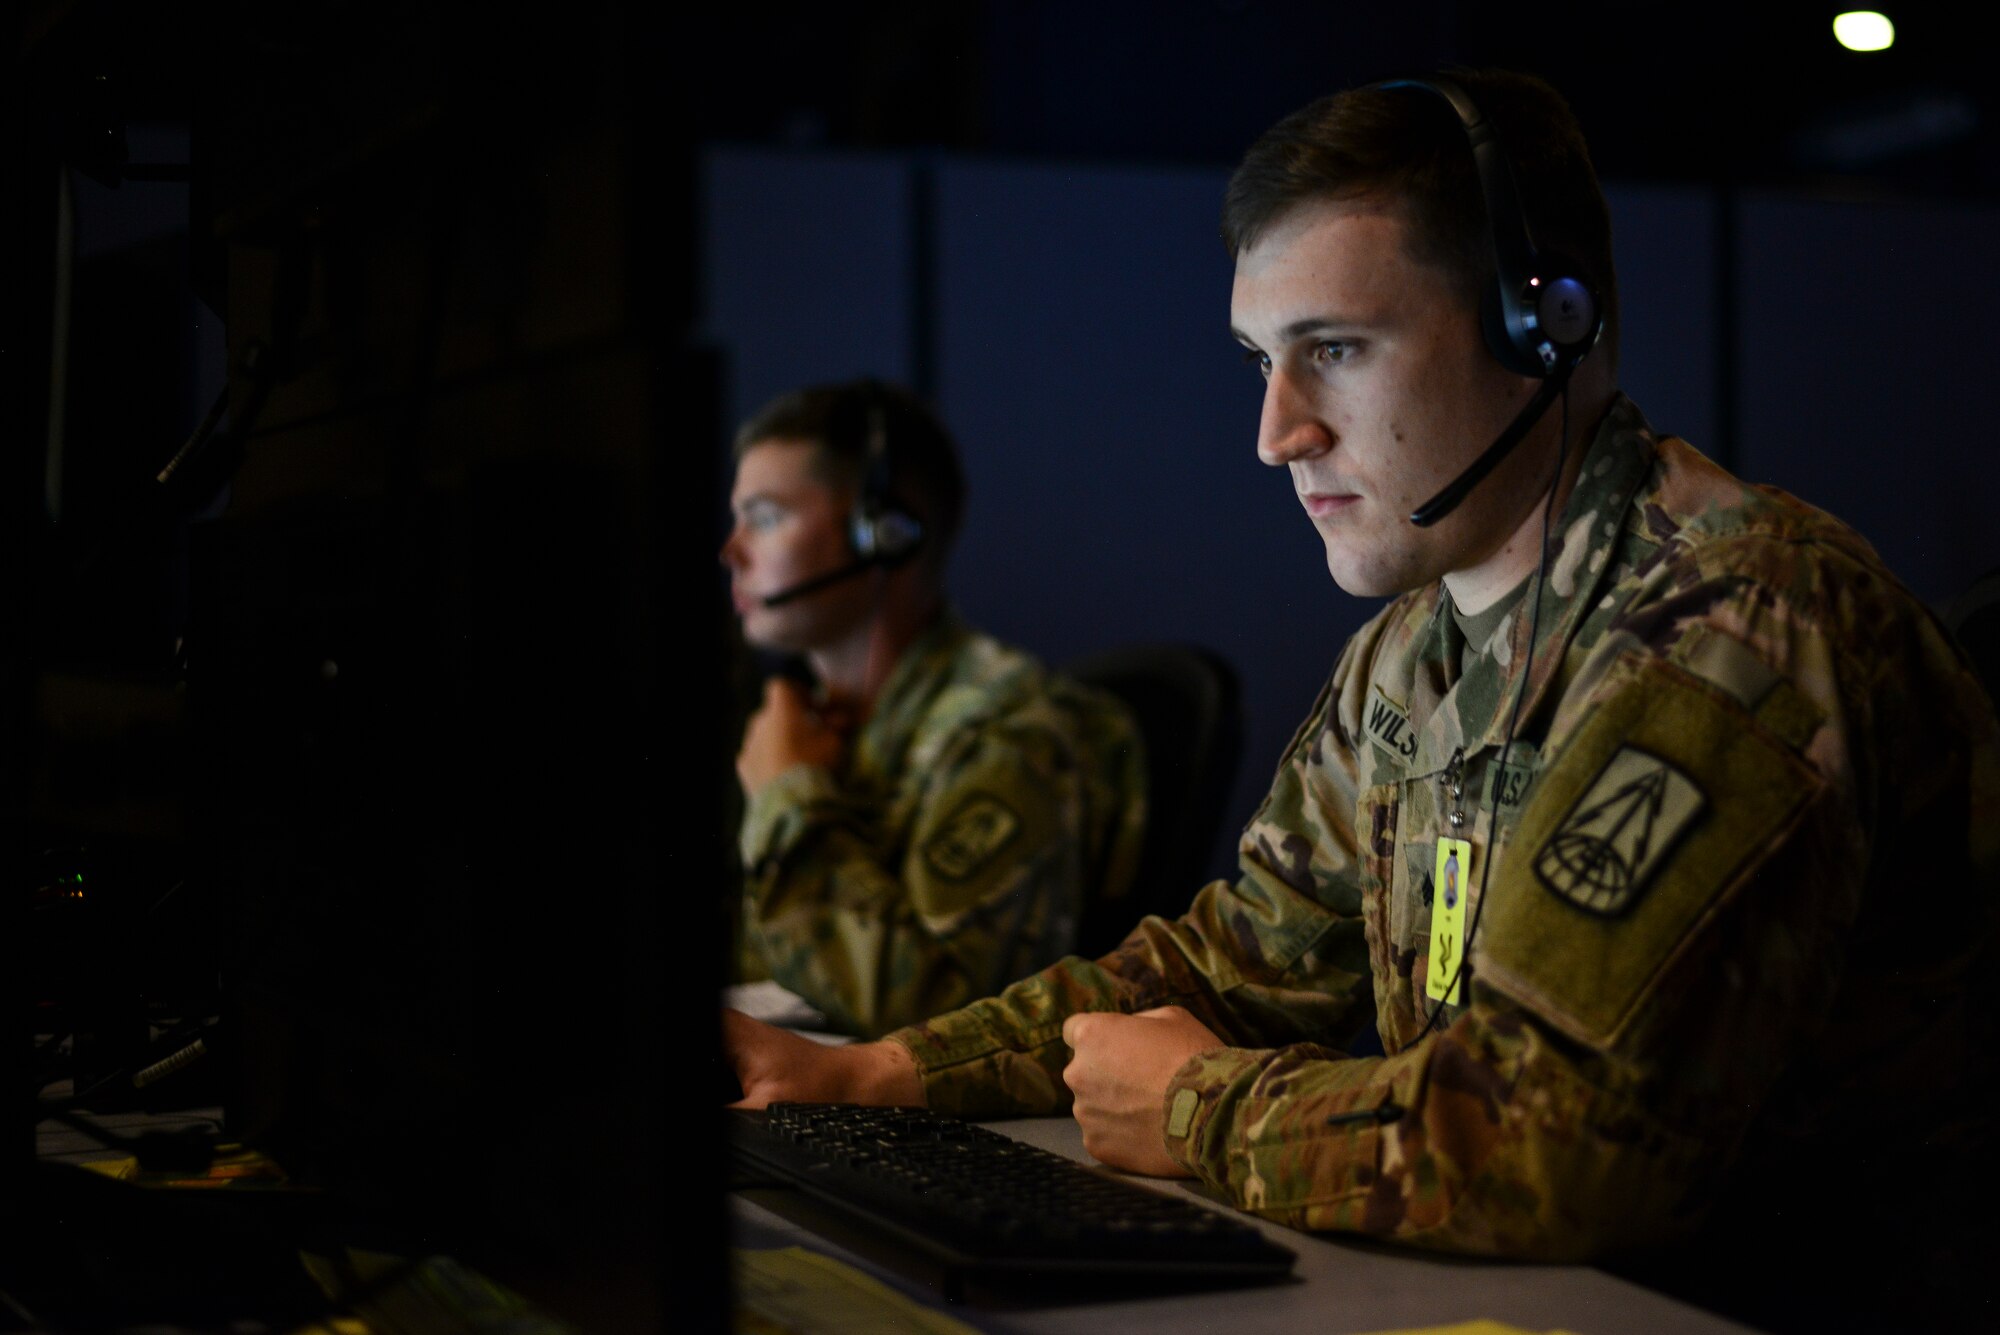 A member of the U.S. Army takes part in the Exercise Coalition VIRTUAL FLAG 19-4 at Kirtland Air Force Base, N.M., Sept. 10, 2019.  With the most participants ever hosted at the DMOC, the participants were presented with a contemporary multi-domain threat where exercise participants had to think through difficult problem sets, including several that the Chief of Staff of the Air Force has challenged the U.S. Air Force to address.  (U.S. Air Force photo by Staff Sgt. Kimberly Nagle)